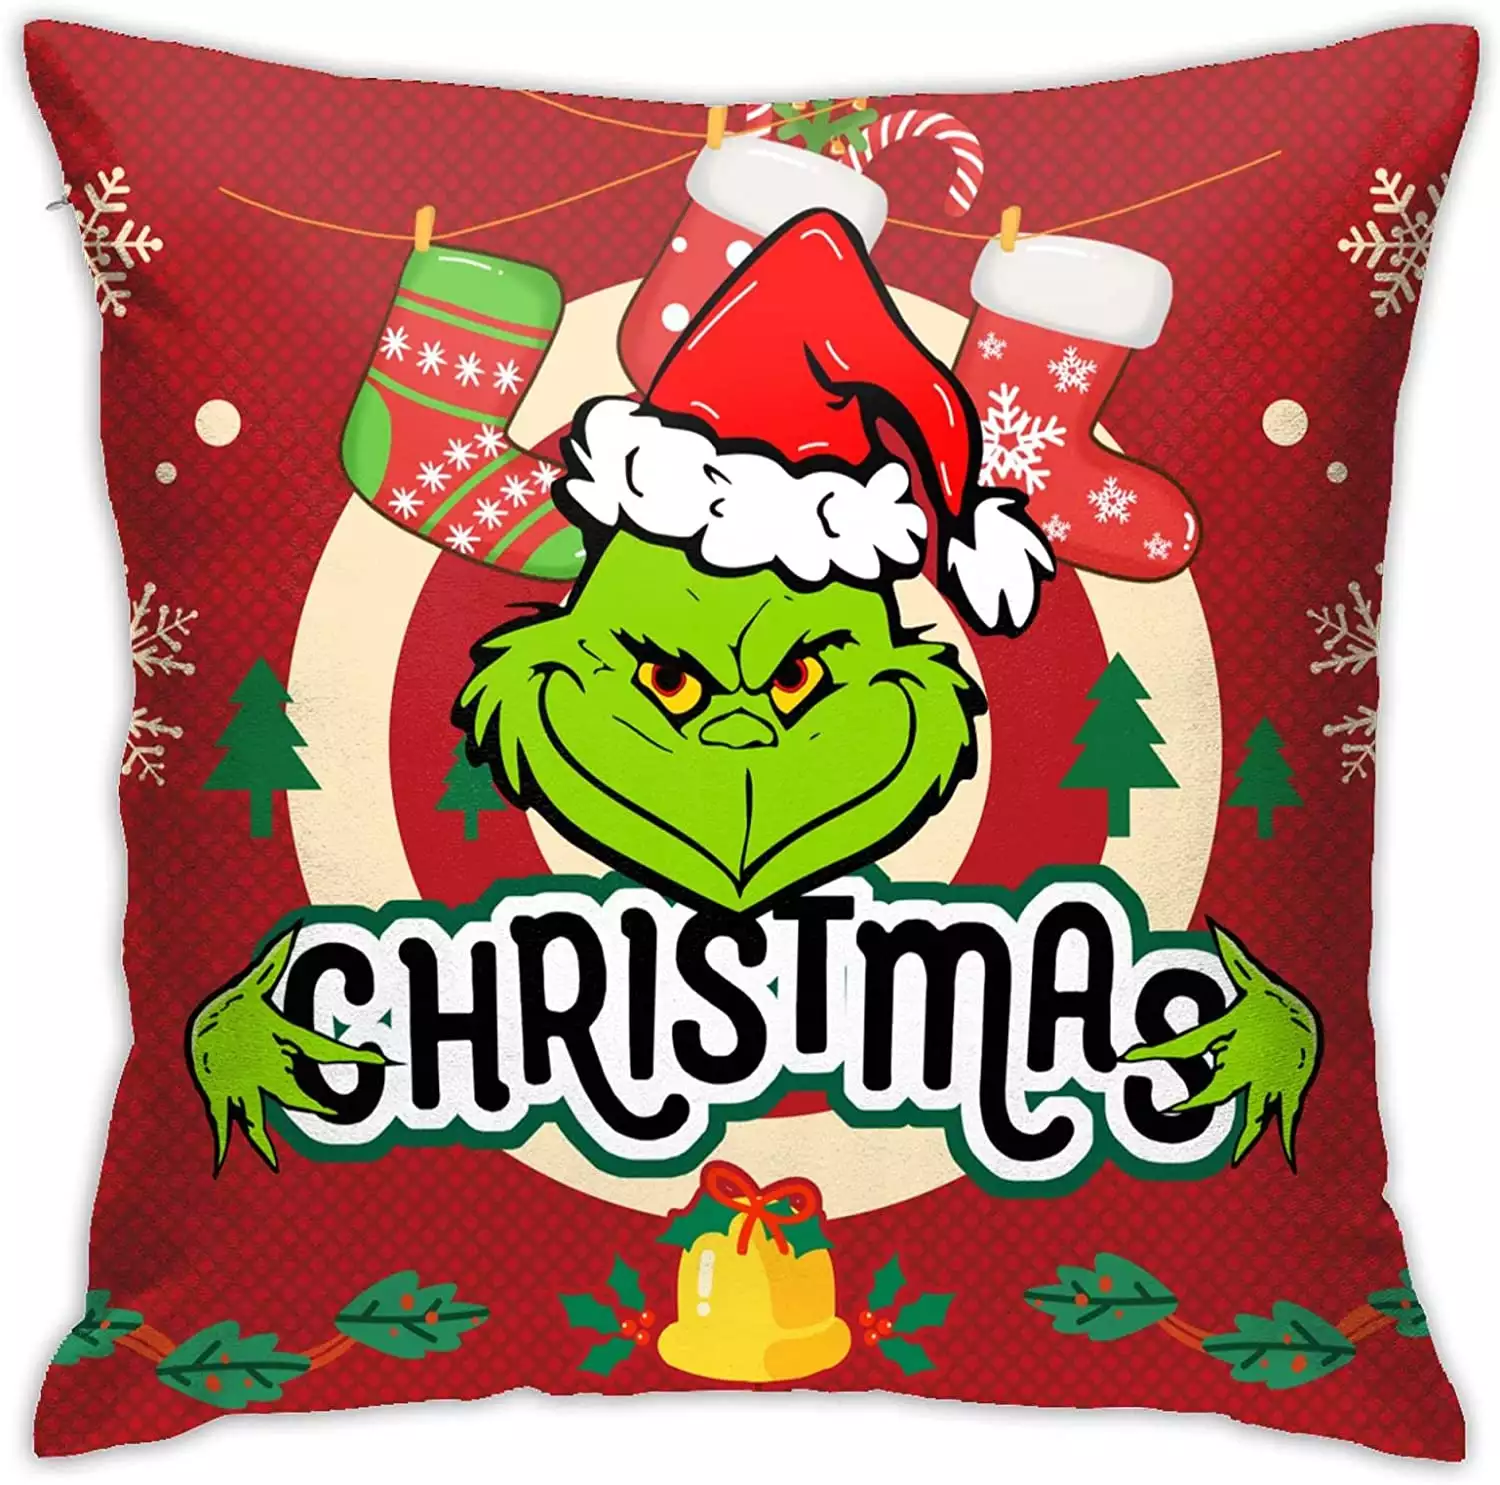 Grinch Pillow | Buy Grinch Pillows For Your Every Christmas | Big